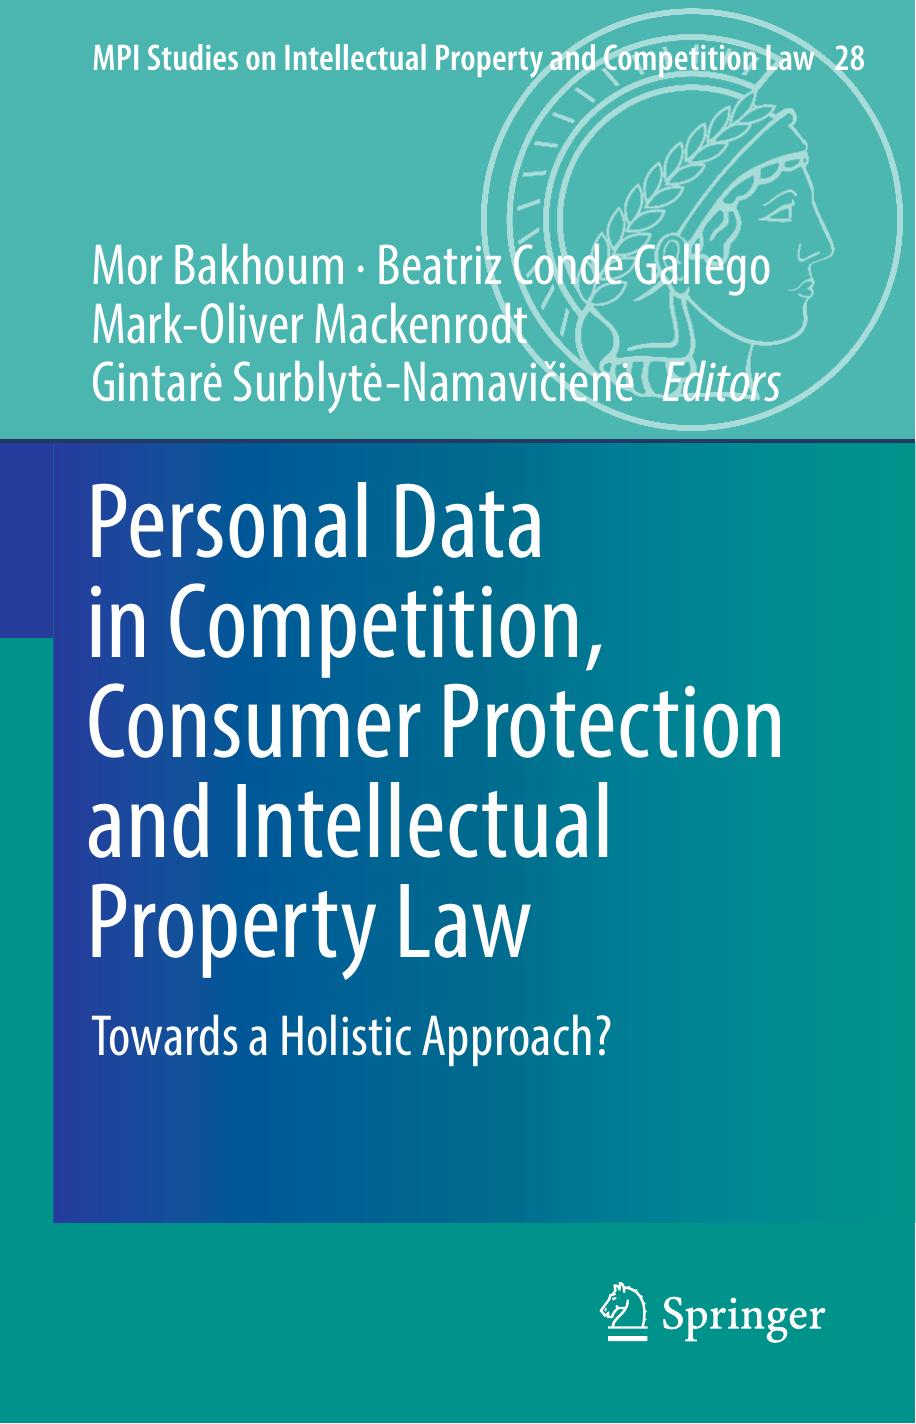 Personal Data in Competition, Consumer Protection and Intellectual Property Law Towards a Holistic Approach 2018